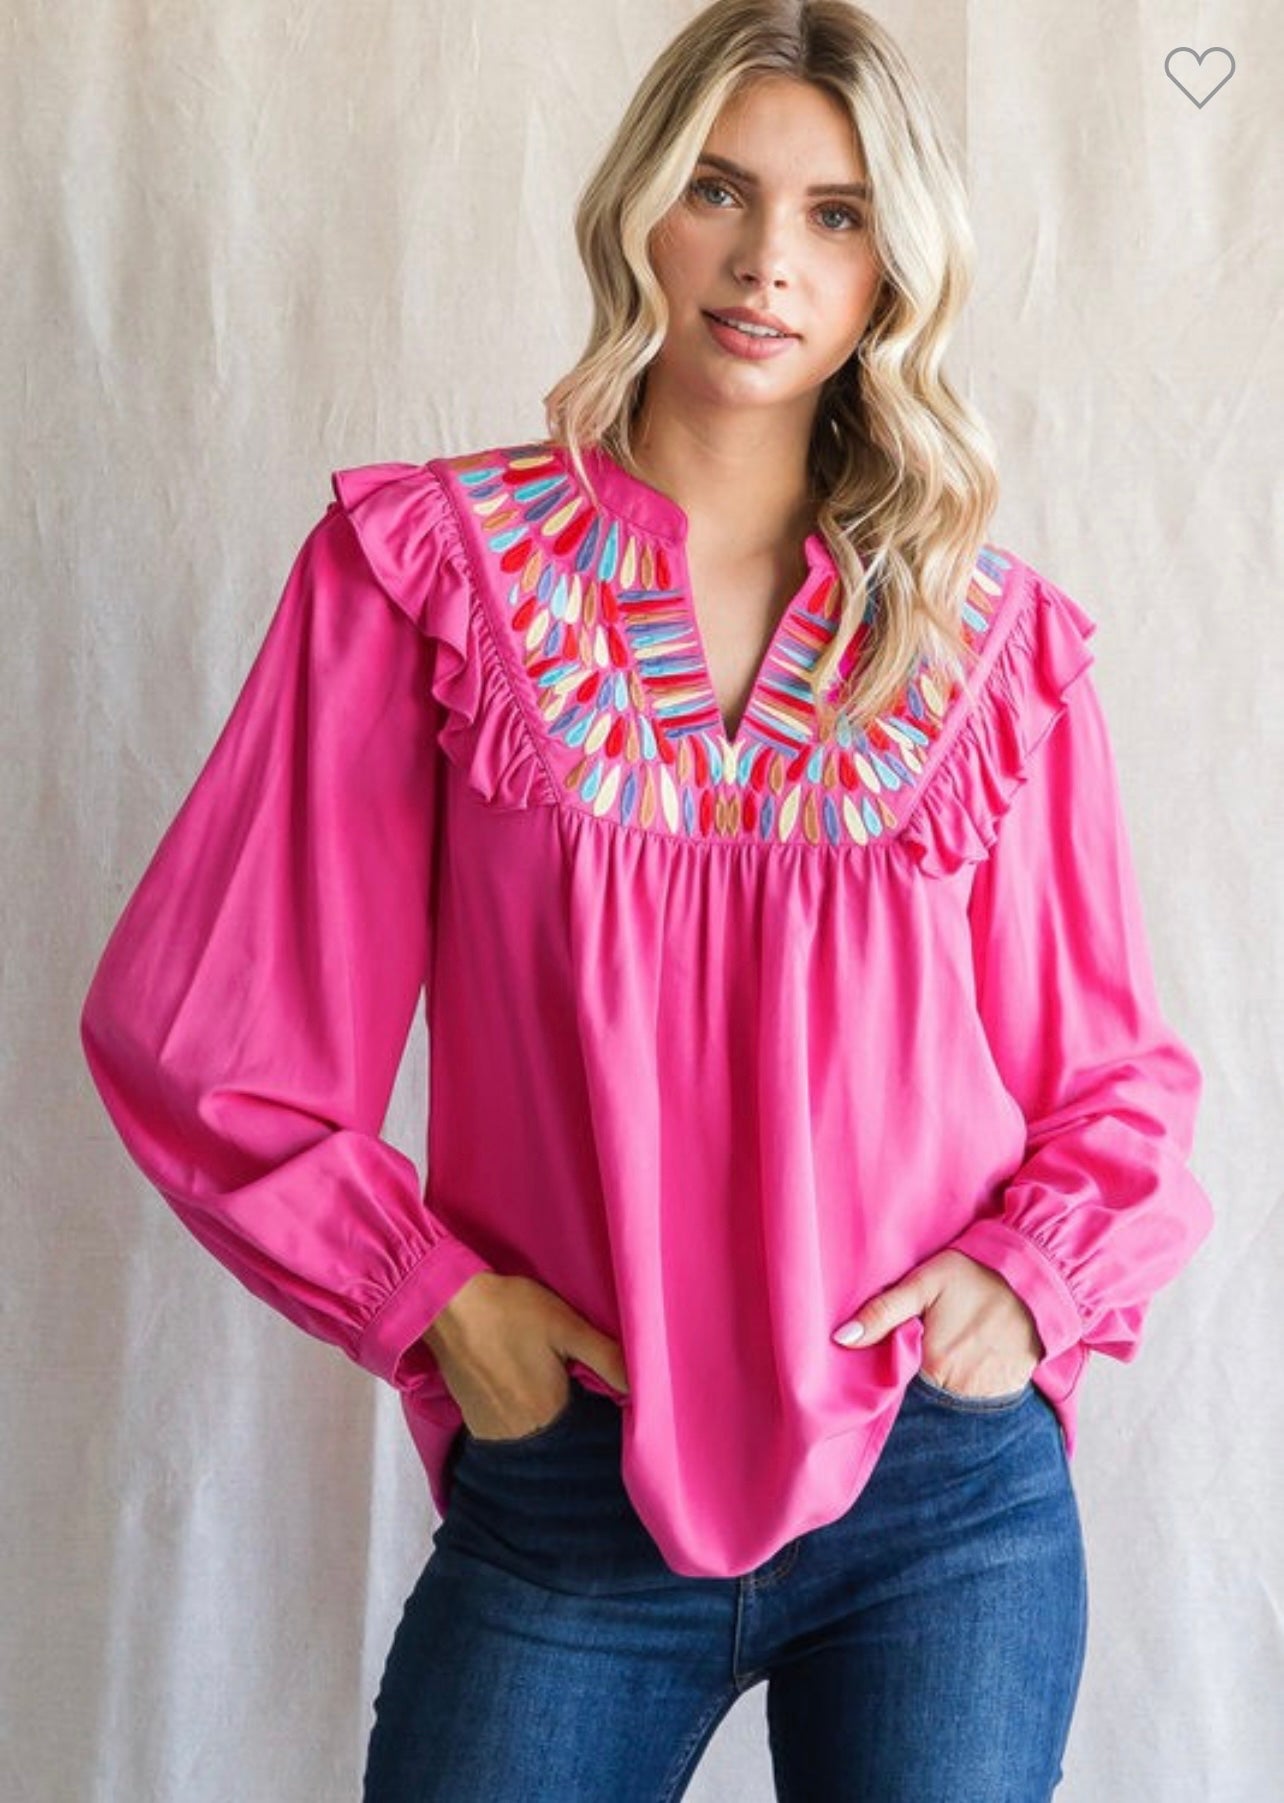 Solid hot pink Ruffled Embroidery Yoke Top